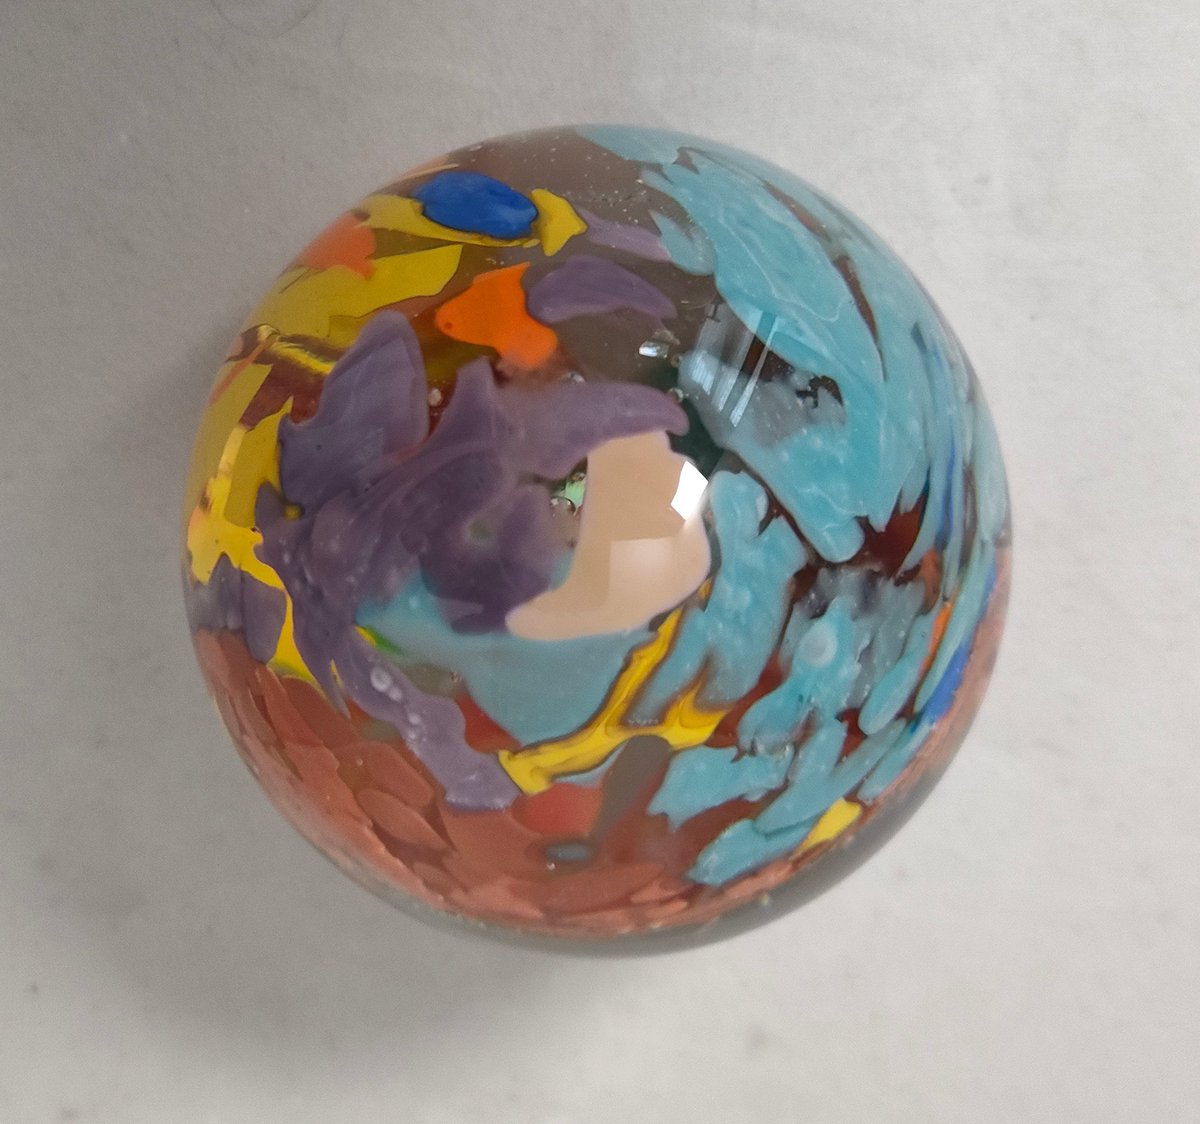 Excited to share the latest addition to my #etsy shop: Collectable Unusual Vintage Mdina Glass Paperweight etsy.me/3O7cuoE #sphericalweight #glasspaperweight #mdinapaperweight #mdinaglass #malteseglass #glass #silverdragonfinds